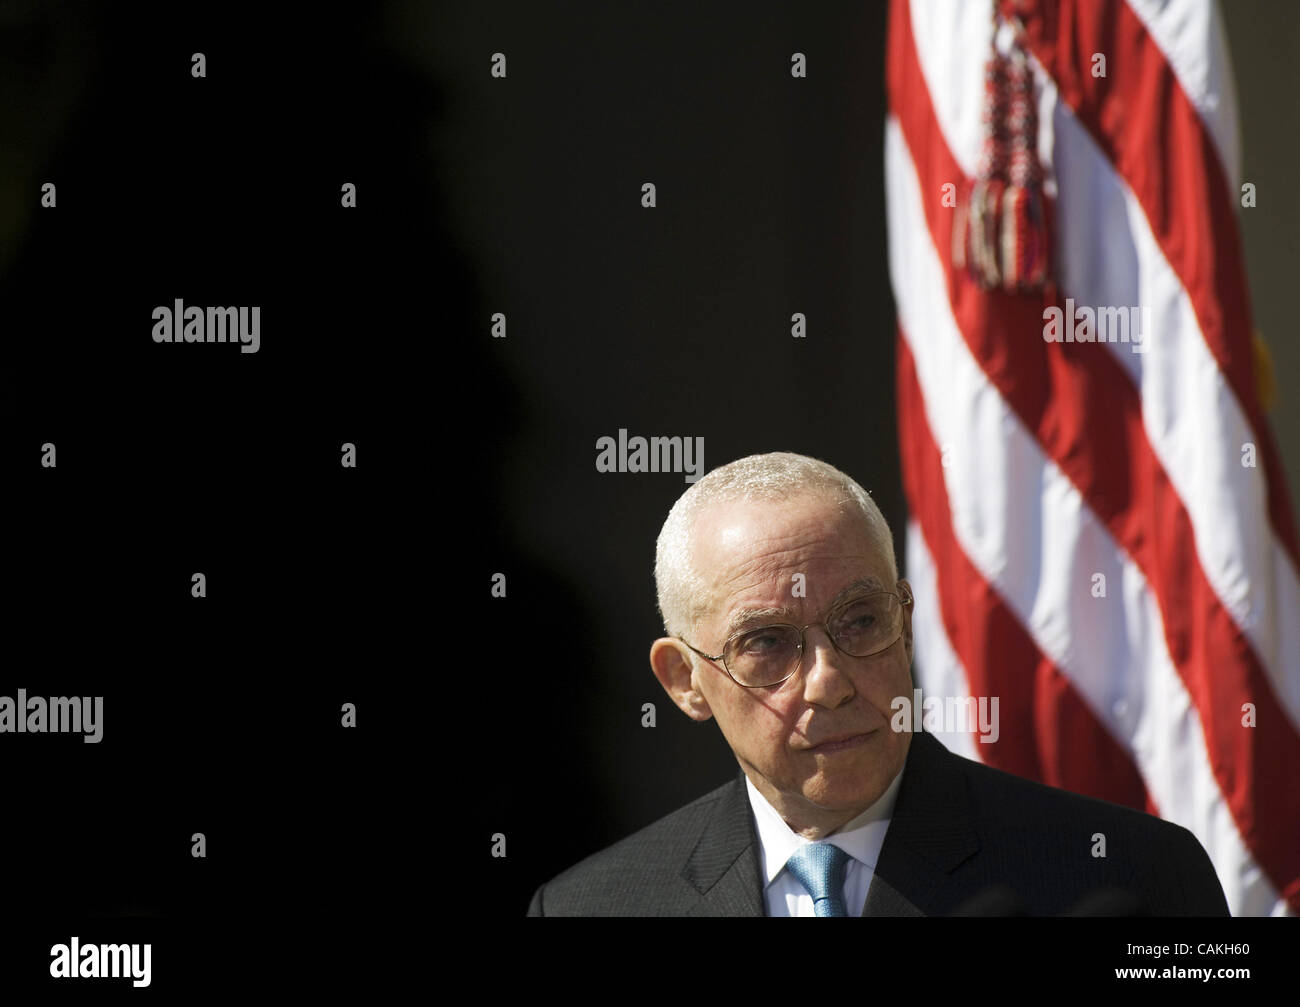 Retired federal judge Michael Mukasey looks at US President George W. Bush while he speaks 17 September 2007 during a press conference in the Rose Garden of the White House in Washington, DC. Bush named Mukasey as replacement for Attorney General Alberto Gonzales who resigned in August. AFP PHOTO/Ma Stock Photo